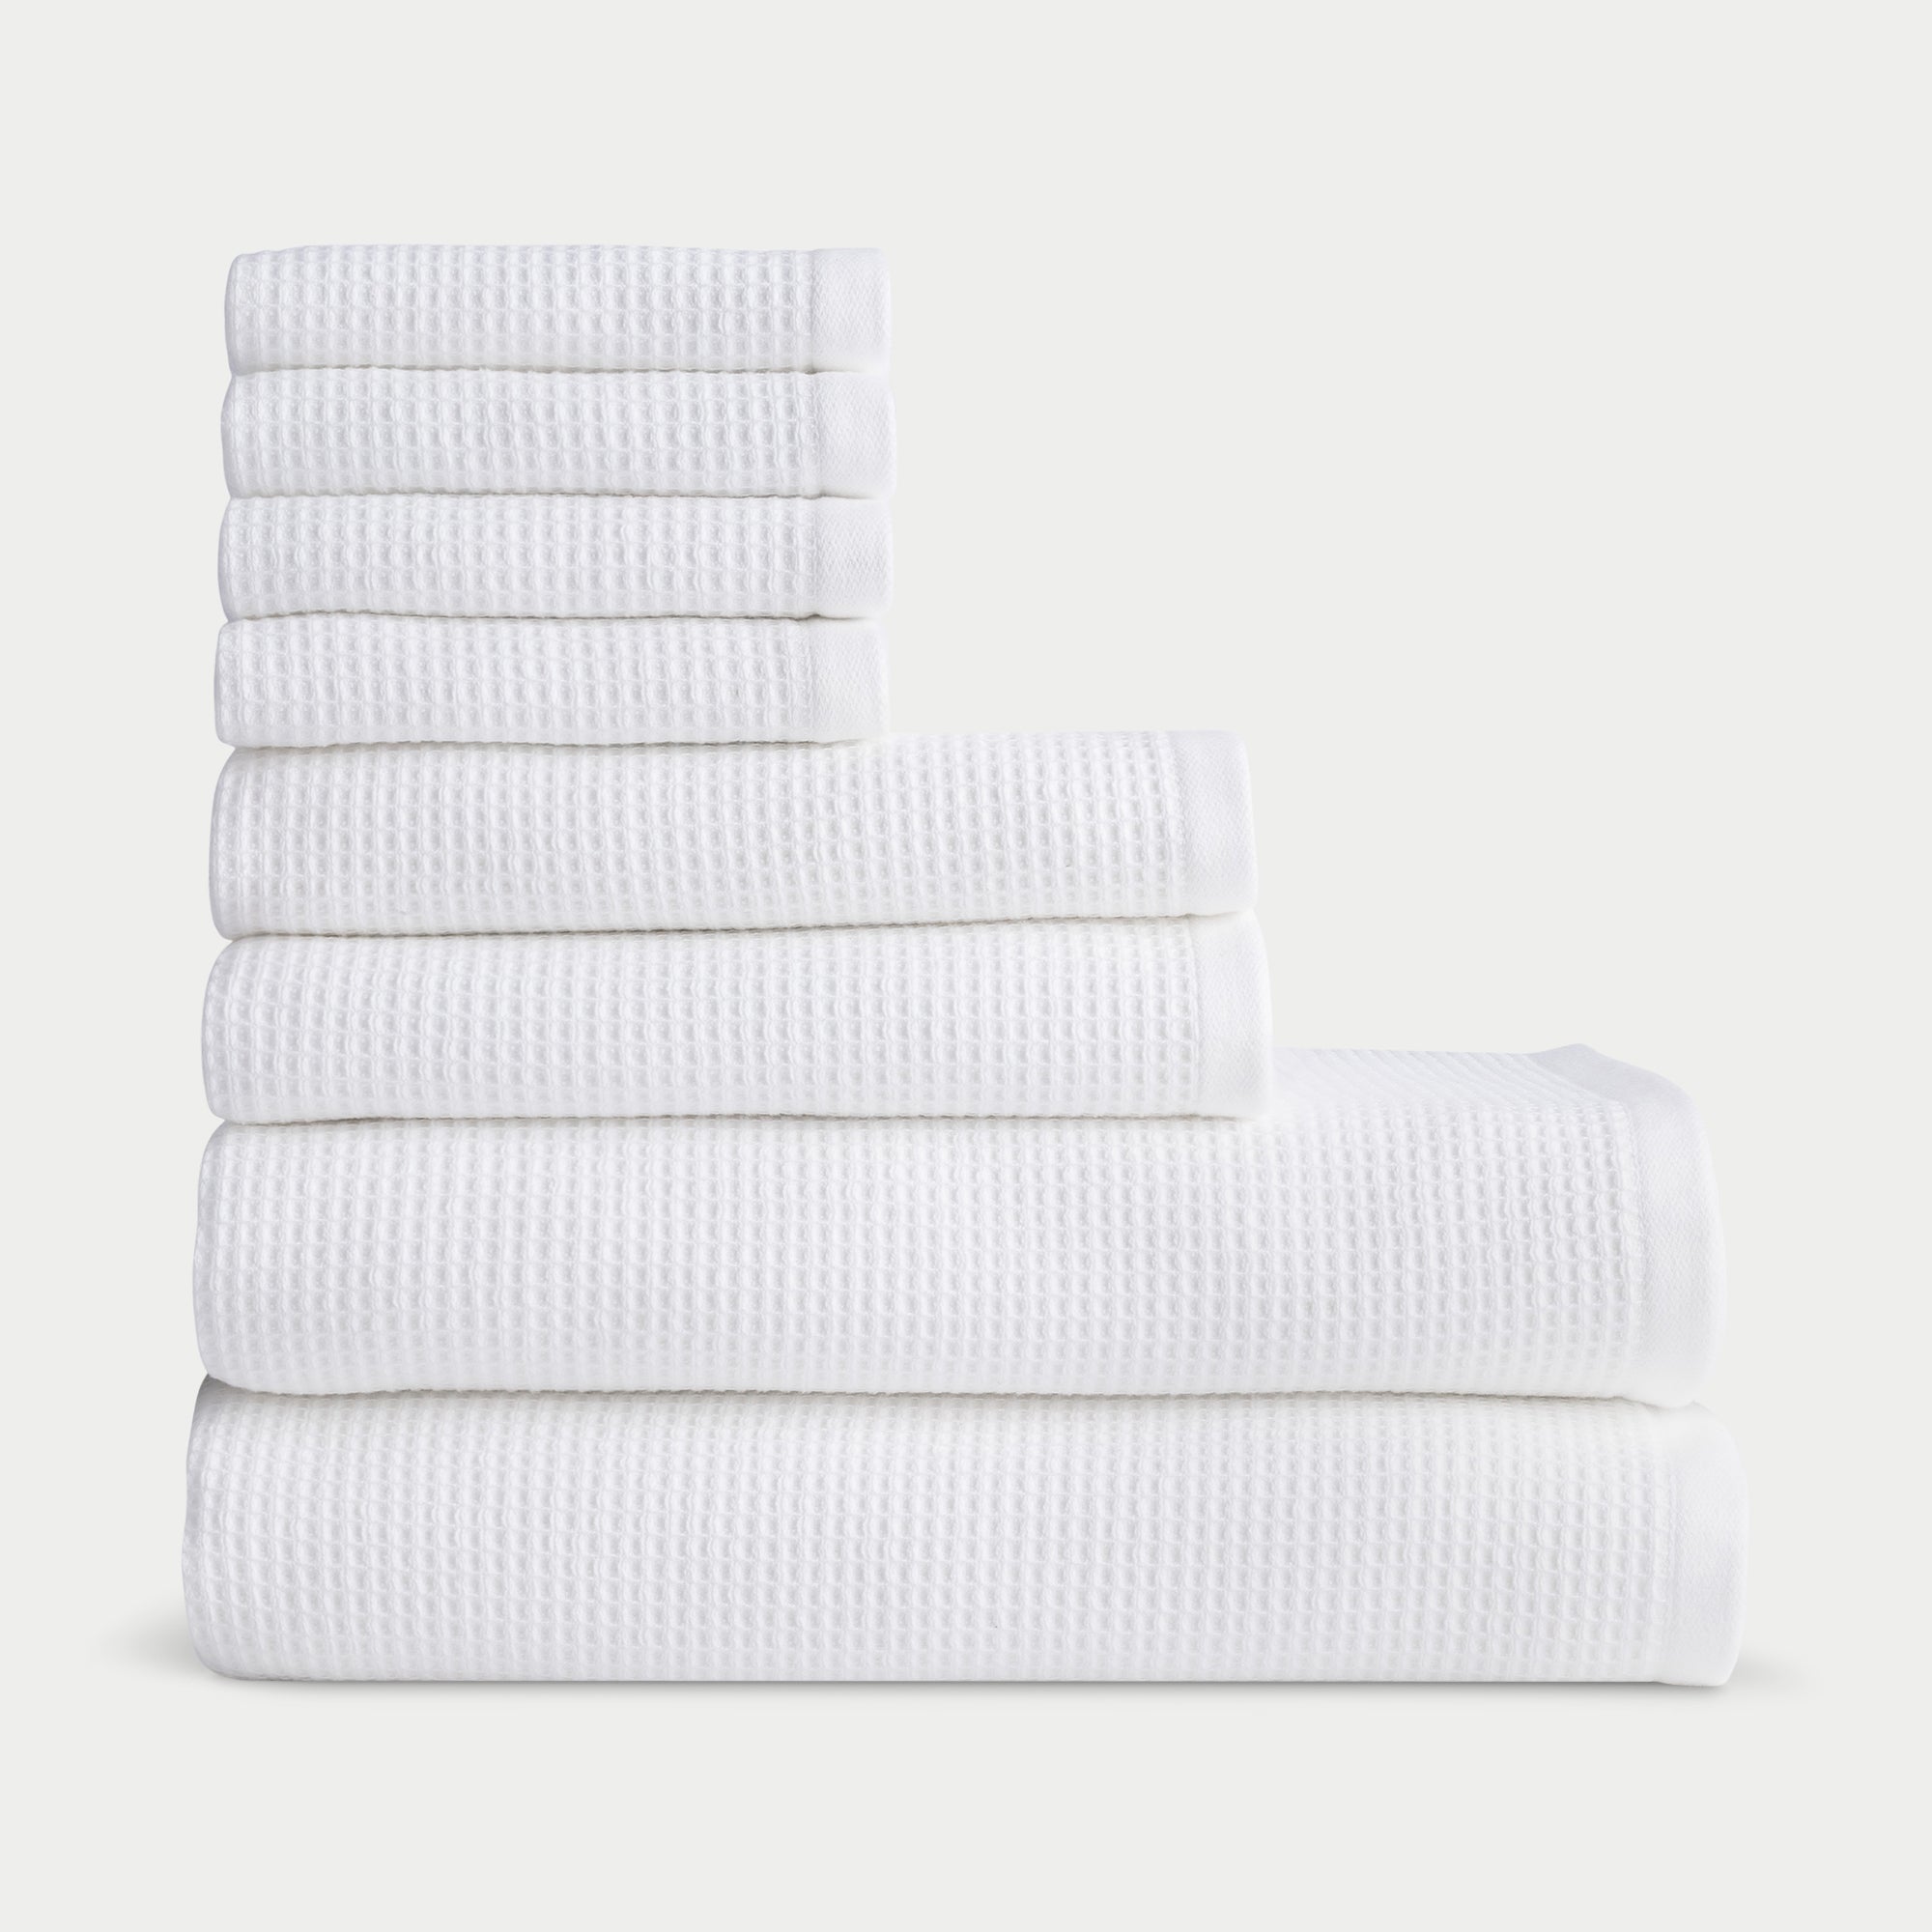 Waffle Bath Towel Set in the color White. Photo of white Waffle Bath Towel Set taken with white background. |Color:White